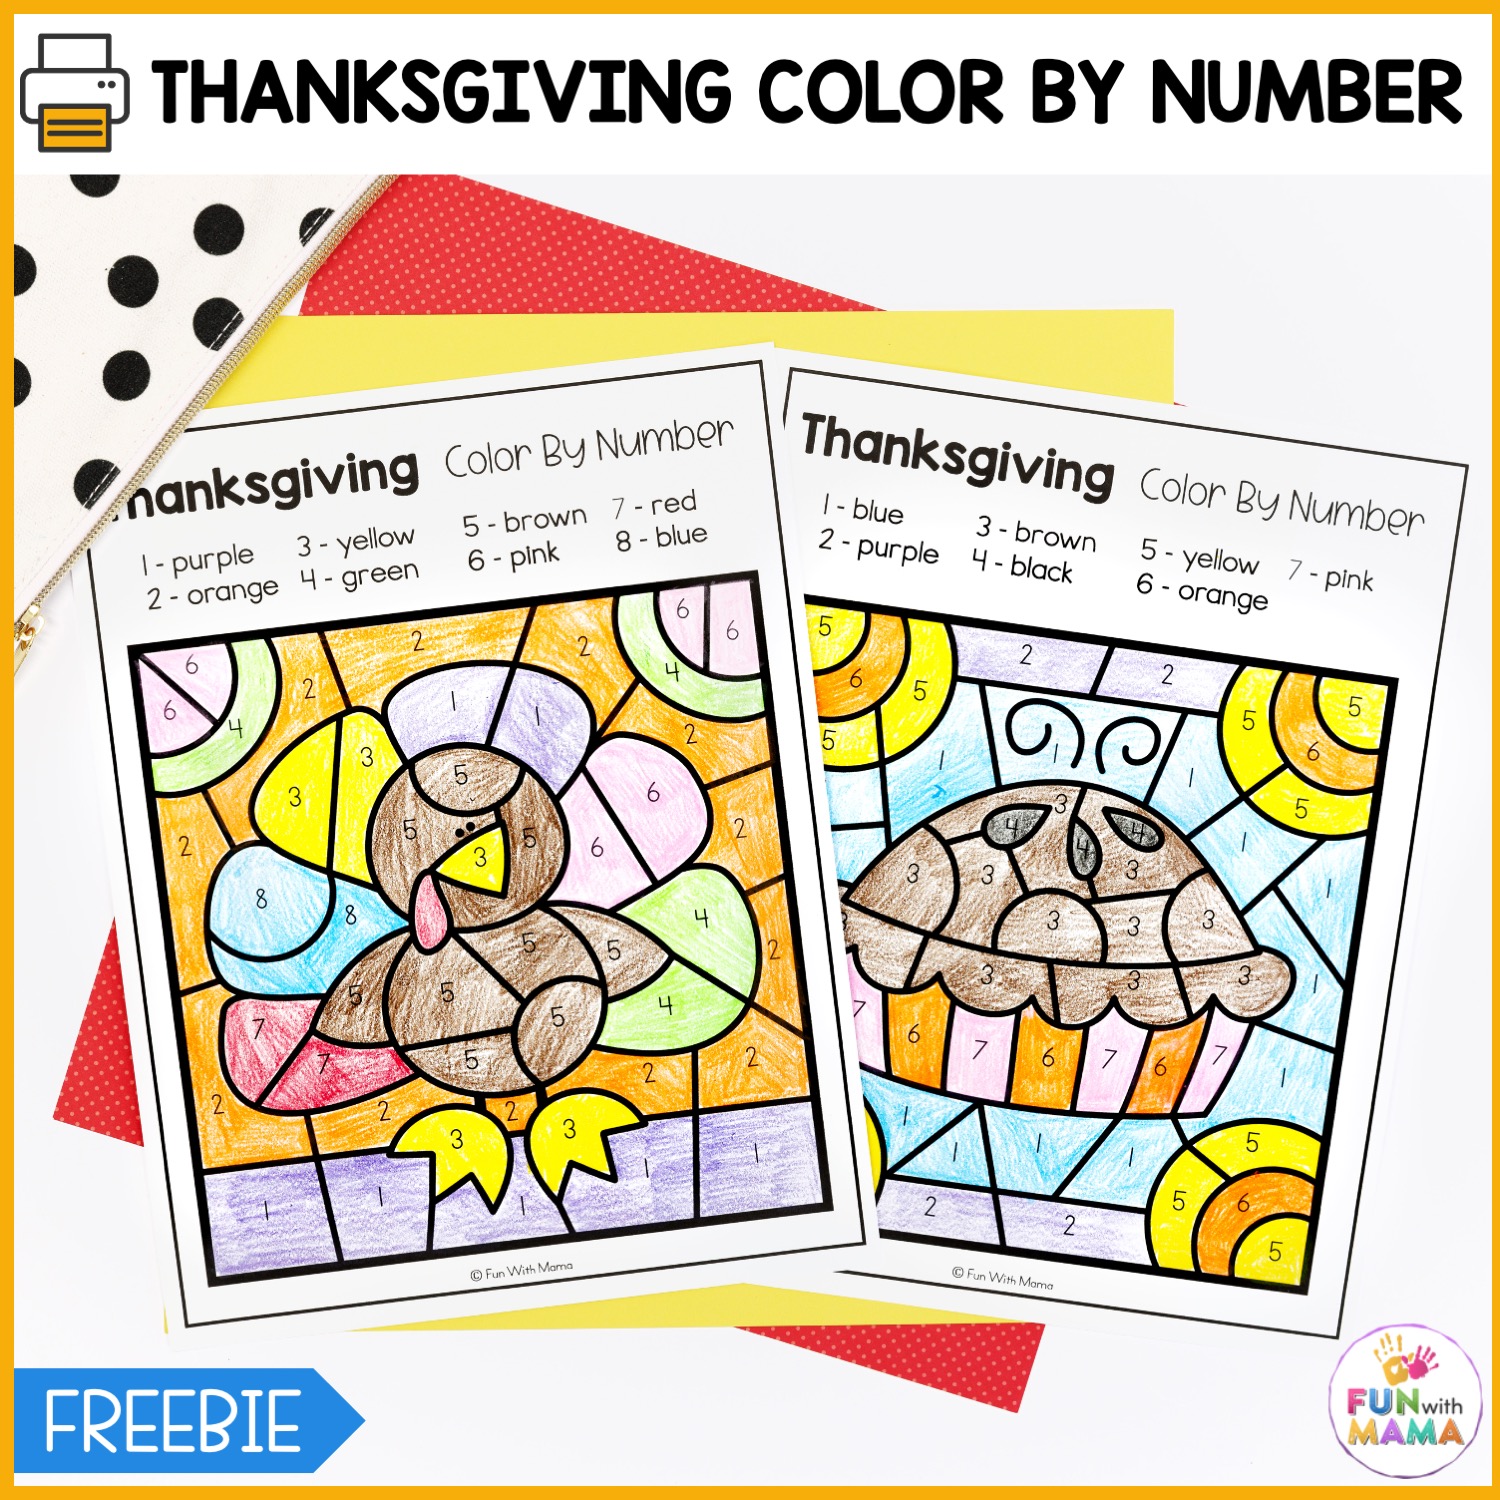 Thanksgiving-Color-by-Number